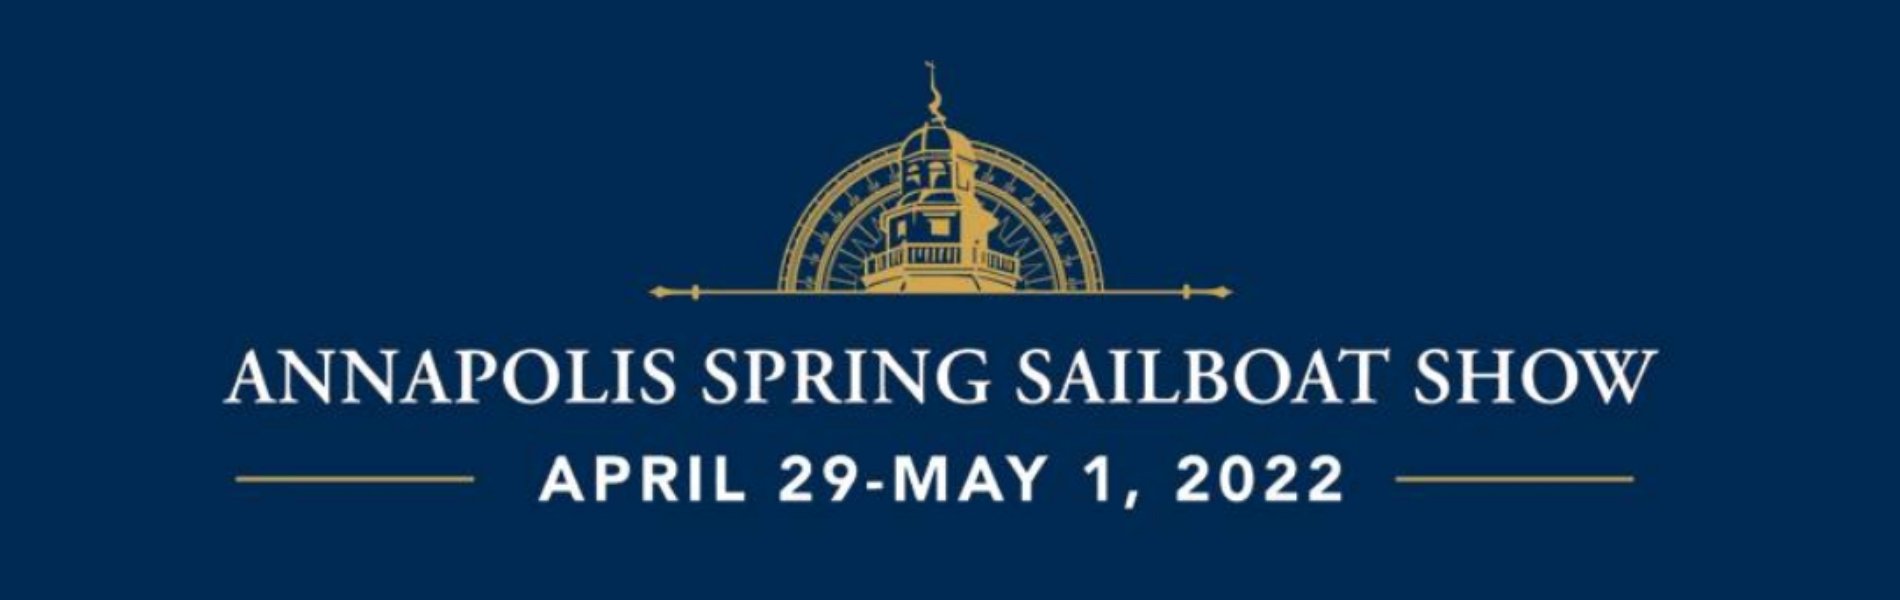 ugo® Will Be At The Annapolis Spring Sail Boat Show 2022!